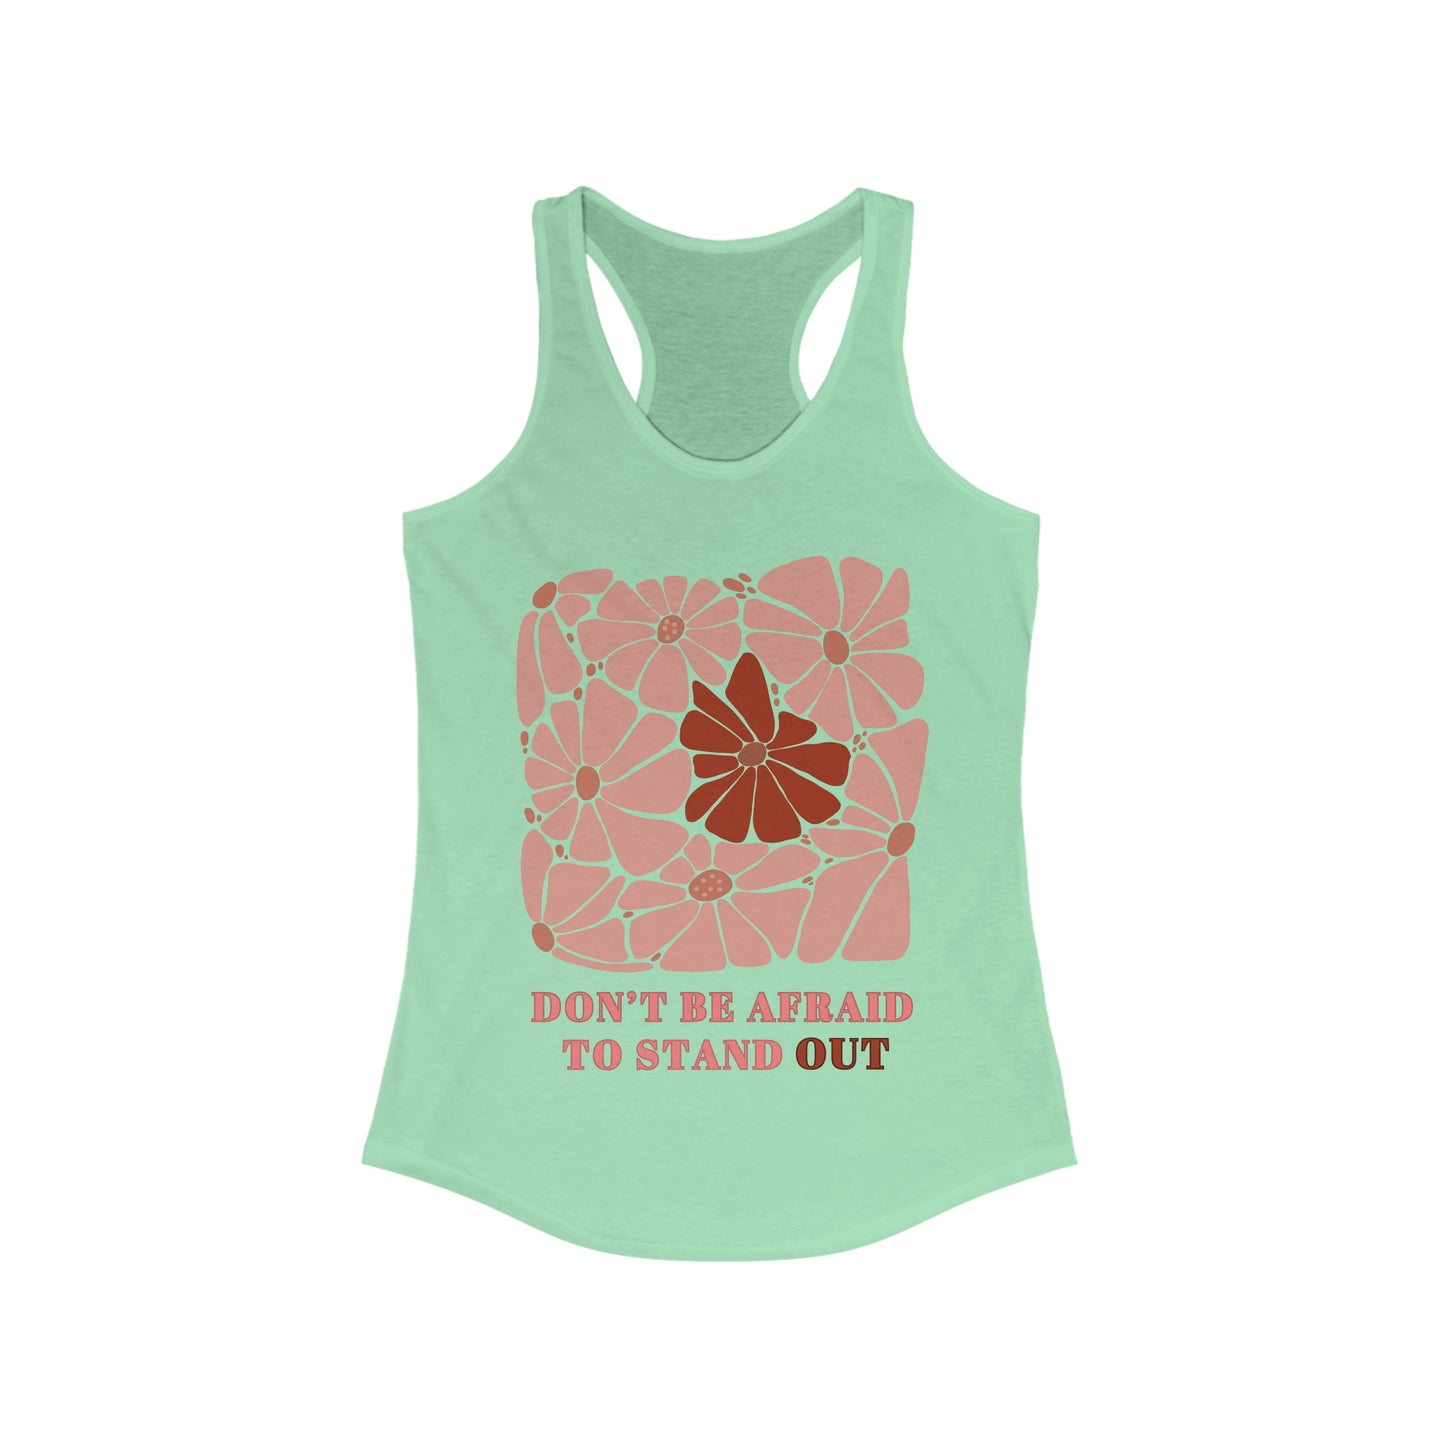 Don’t be Afraid to Stand Out - Women's Ideal Racerback Tank